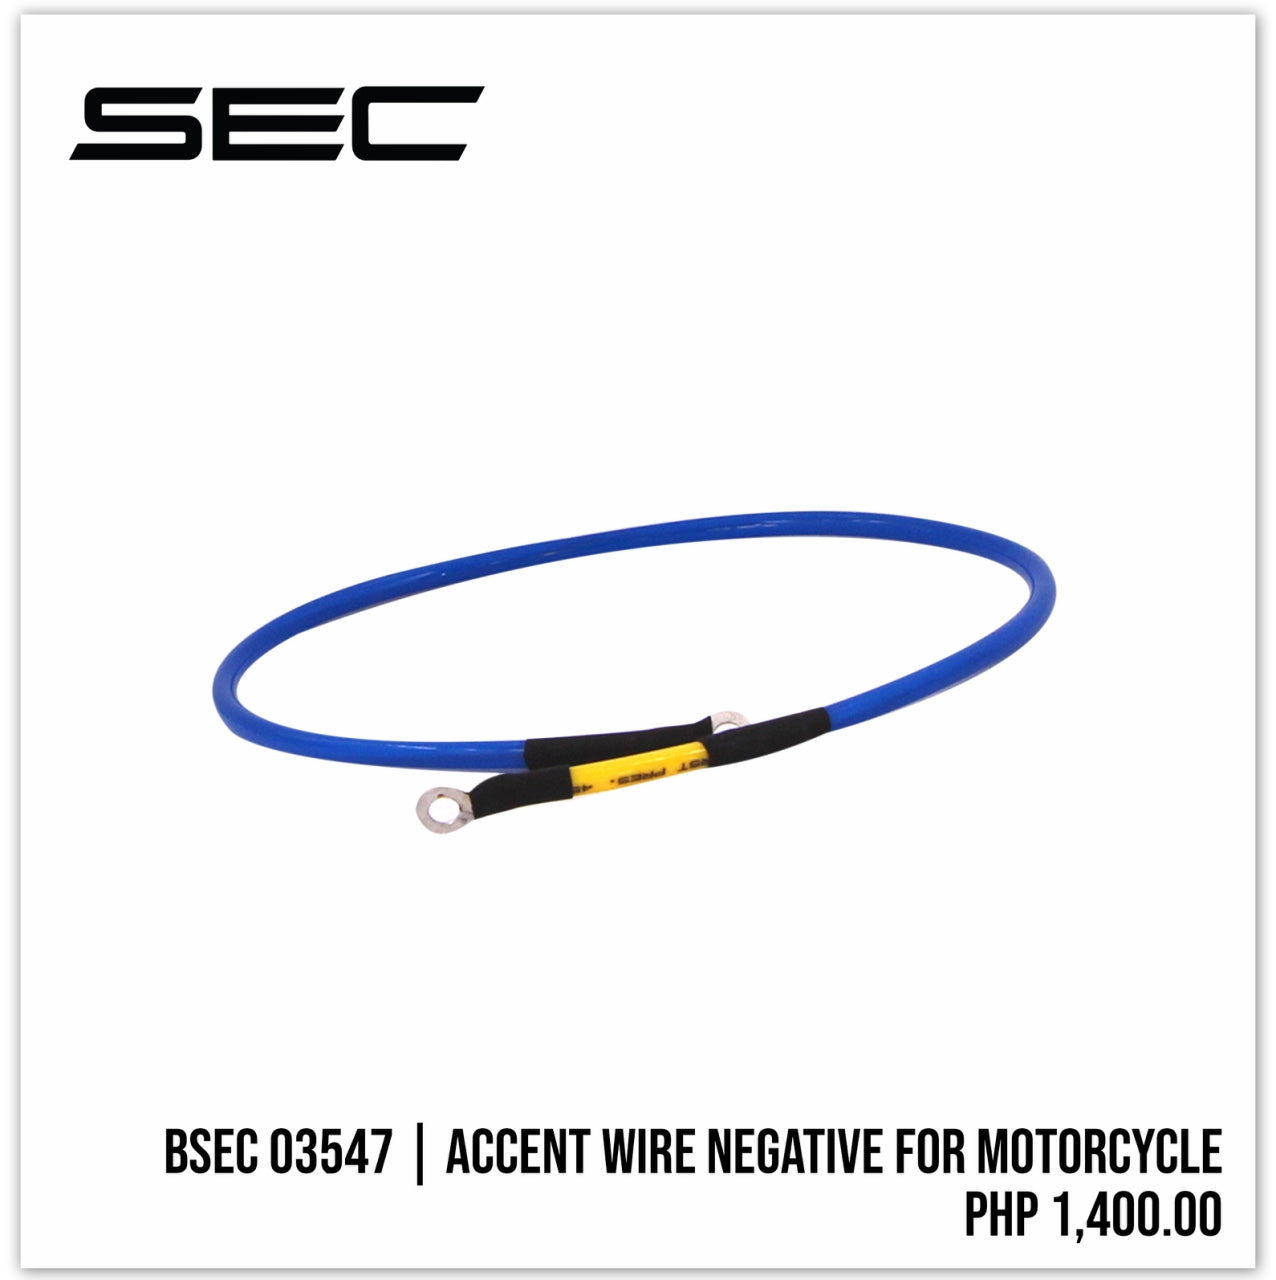 Accent Wire Negative for Motorcycle